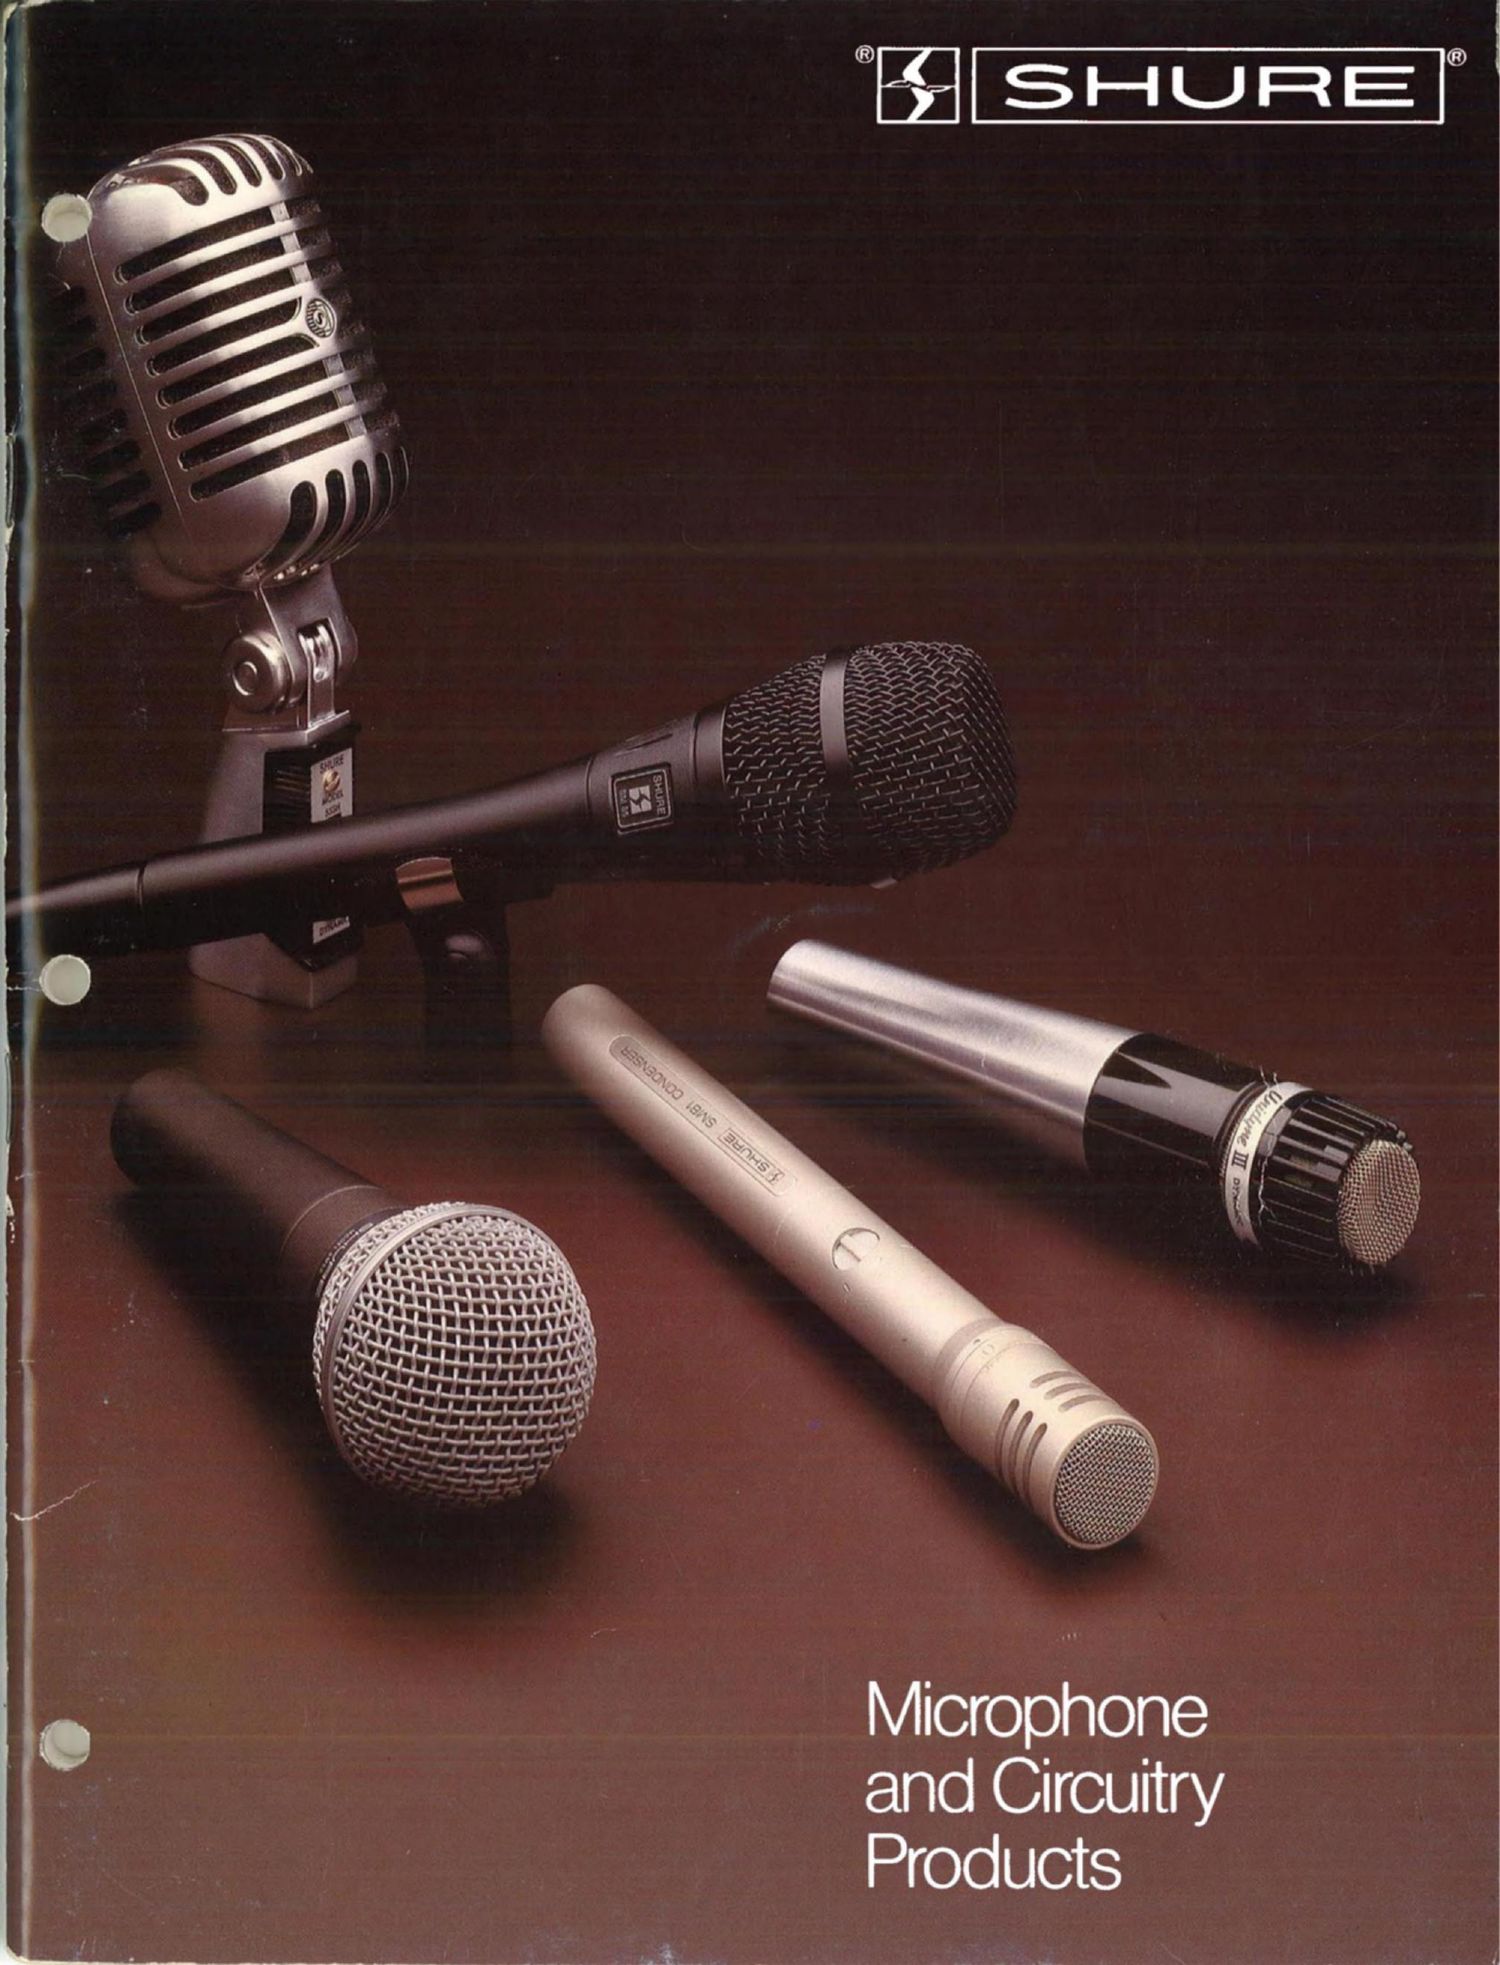 shure 1981 catalogue microphone and circuitry products